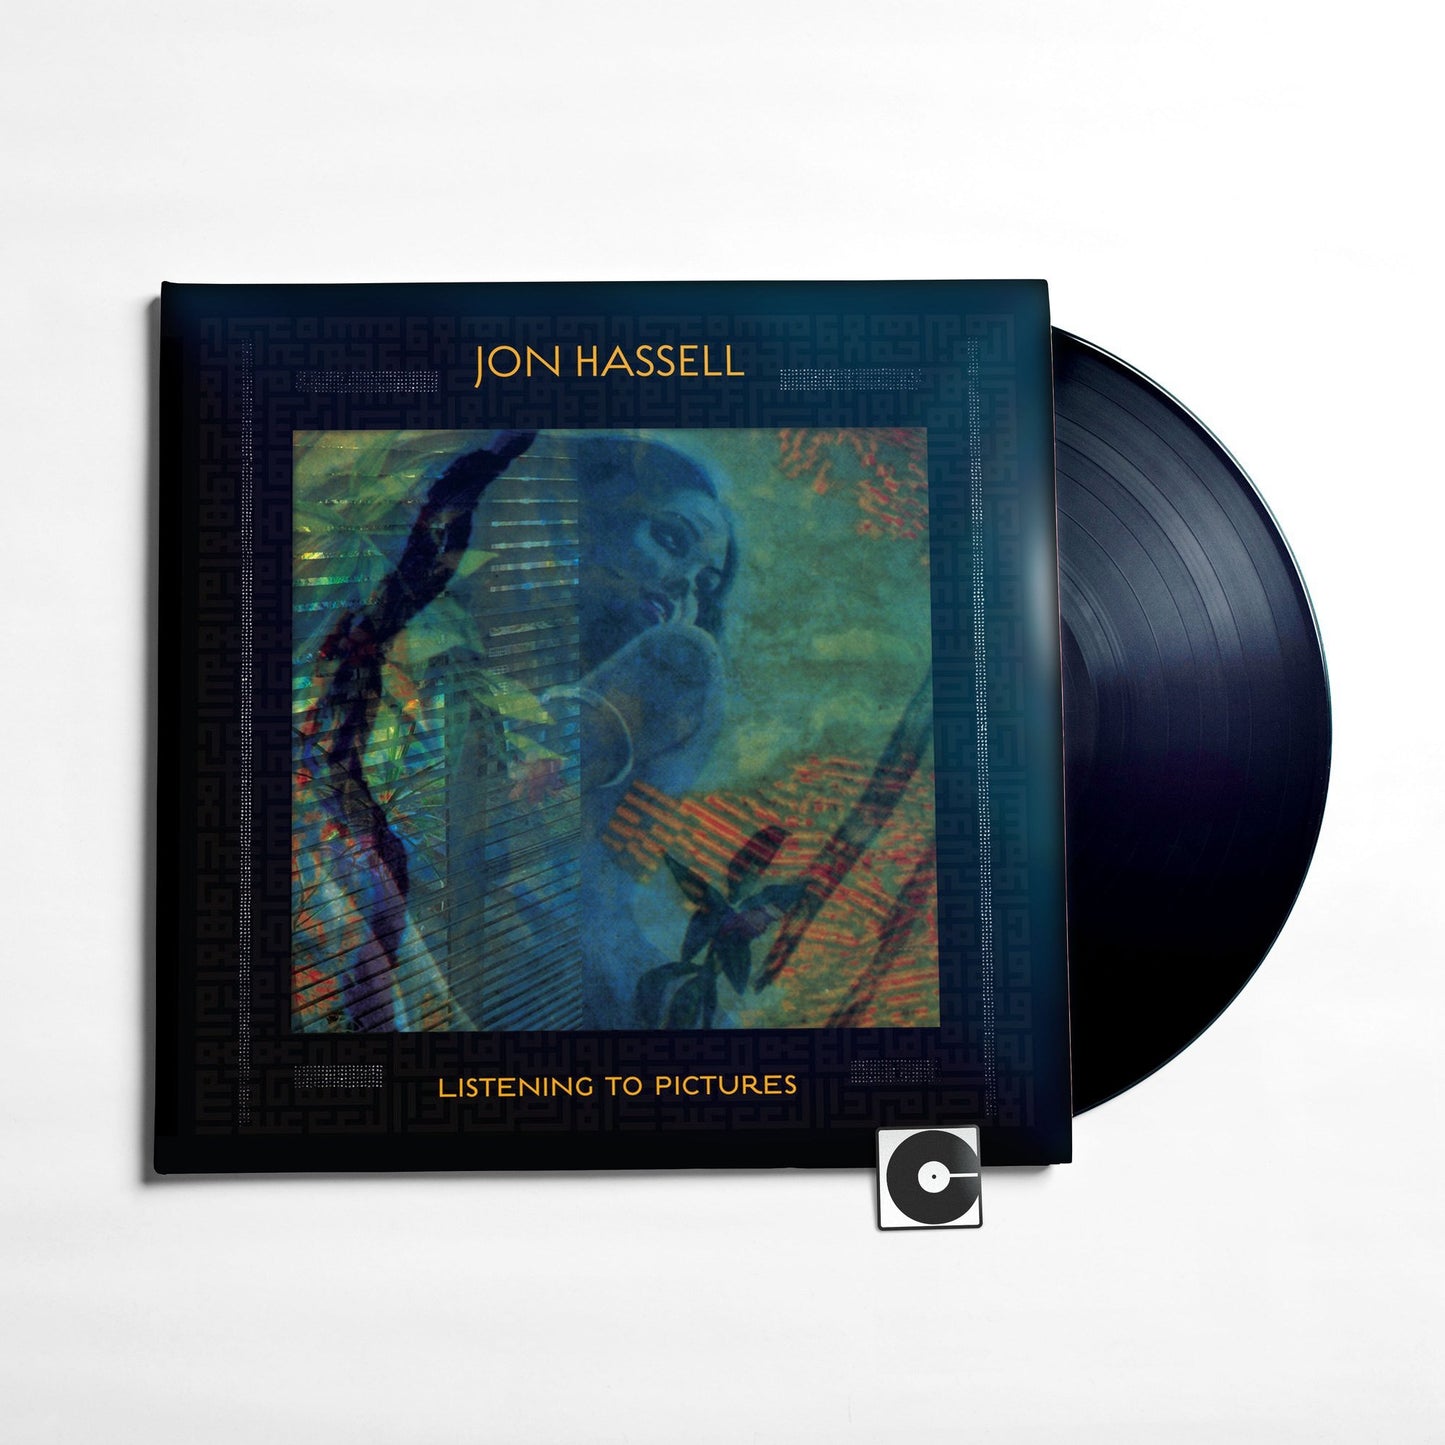 Jon Hassell - "Listening To Pictures: Pentimento Volume One"